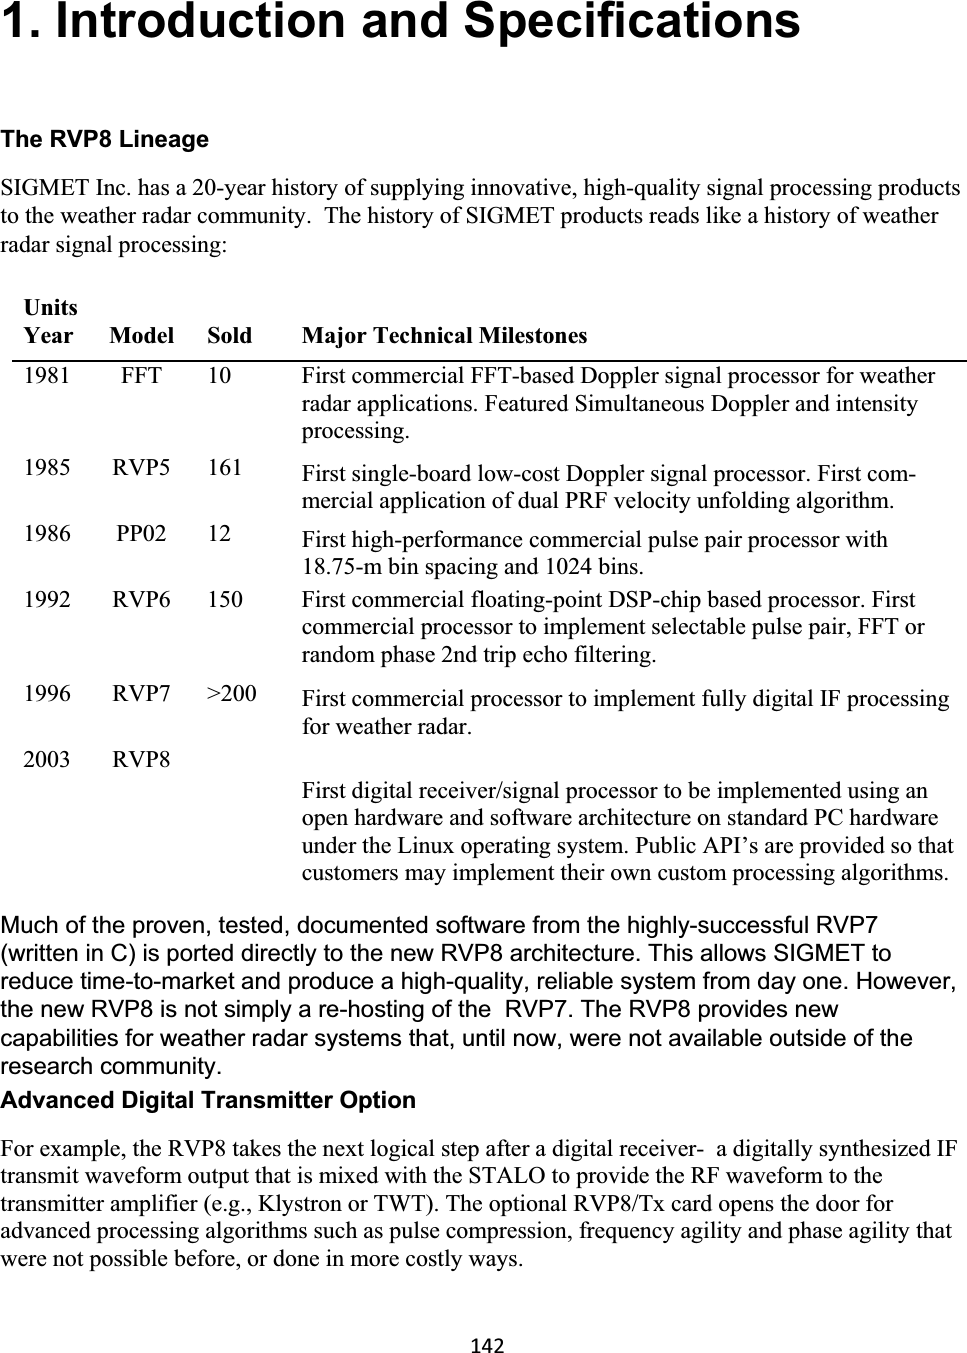 1421. Introduction and Specifications The RVP8 Lineage SIGMET Inc. has a 20-year history of supplying innovative, high-quality signal processing products to the weather radar community.  The history of SIGMET products reads like a history of weather radar signal processing:  Much of the proven, tested, documented software from the highly-successful RVP7 (written in C) is ported directly to the new RVP8 architecture. This allows SIGMET to reduce time-to-market and produce a high-quality, reliable system from day one. However, the new RVP8 is not simply a re-hosting of the  RVP7. The RVP8 provides new capabilities for weather radar systems that, until now, were not available outside of the research community.  Advanced Digital Transmitter Option For example, the RVP8 takes the next logical step after a digital receiver-  a digitally synthesized IF transmit waveform output that is mixed with the STALO to provide the RF waveform to the transmitter amplifier (e.g., Klystron or TWT). The optional RVP8/Tx card opens the door for advanced processing algorithms such as pulse compression, frequency agility and phase agility that were not possible before, or done in more costly ways.  UnitsYear Model Sold Major Technical Milestones 1981   FFT   10   First commercial FFT-based Doppler signal processor for weather radar applications. Featured Simultaneous Doppler and intensity processing.1985   RVP5   161   First single-board low-cost Doppler signal processor. First com-mercial application of dual PRF velocity unfolding algorithm.  1986   PP02   12   First high-performance commercial pulse pair processor with 18.75-m bin spacing and 1024 bins.  1992   RVP6   150   First commercial floating-point DSP-chip based processor. First commercial processor to implement selectable pulse pair, FFT or random phase 2nd trip echo filtering.  1996   RVP7   &gt;200   First commercial processor to implement fully digital IF processing for weather radar.  2003   RVP8  First digital receiver/signal processor to be implemented using an open hardware and software architecture on standard PC hardware under the Linux operating system. Public API’s are provided so that customers may implement their own custom processing algorithms. 